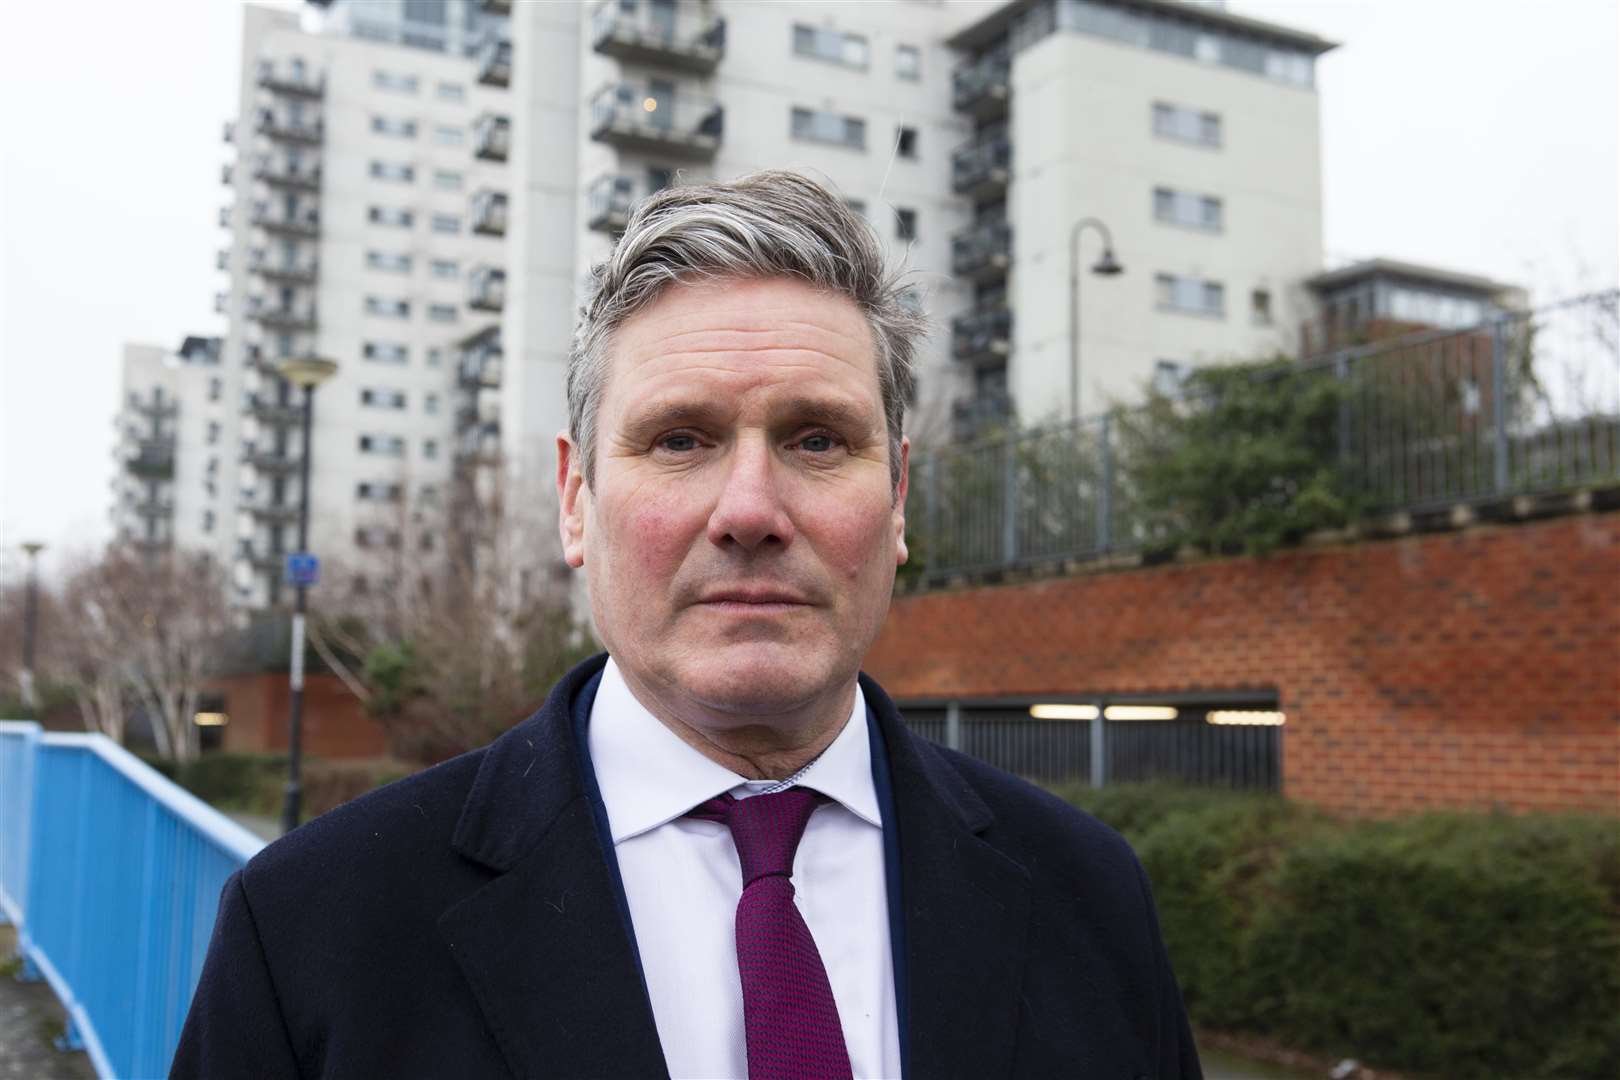 Sir Keir Starmer during a visit to Woolwich (Ian Vogler/Daily Mirror/PA)